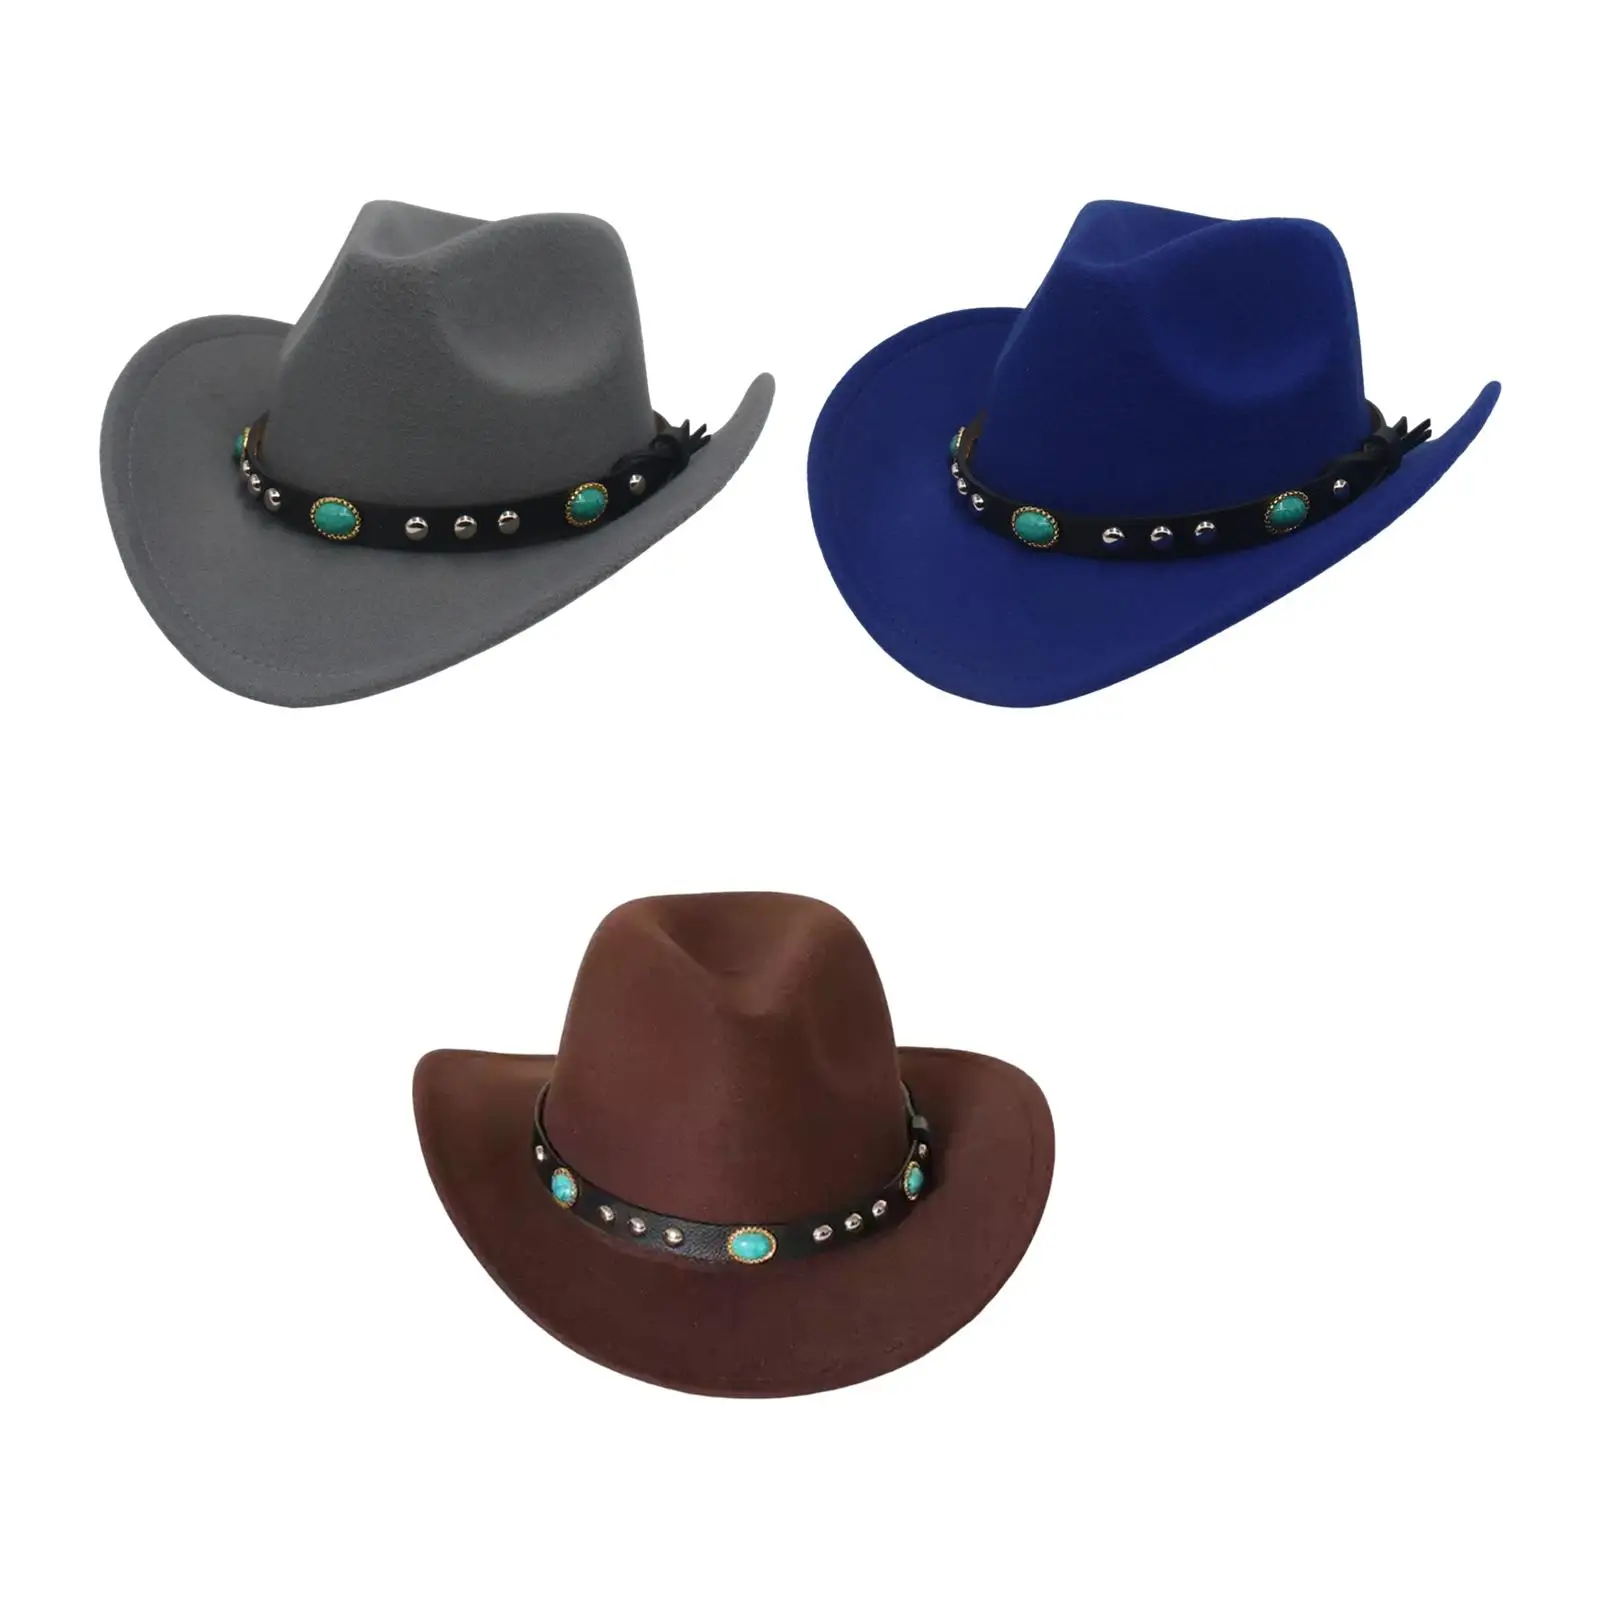 Felt Western  Hat Wide Brim with  Buckle Panama Cowgirl  Costume  Hat for Women Men Outdoor Dress up Hiking